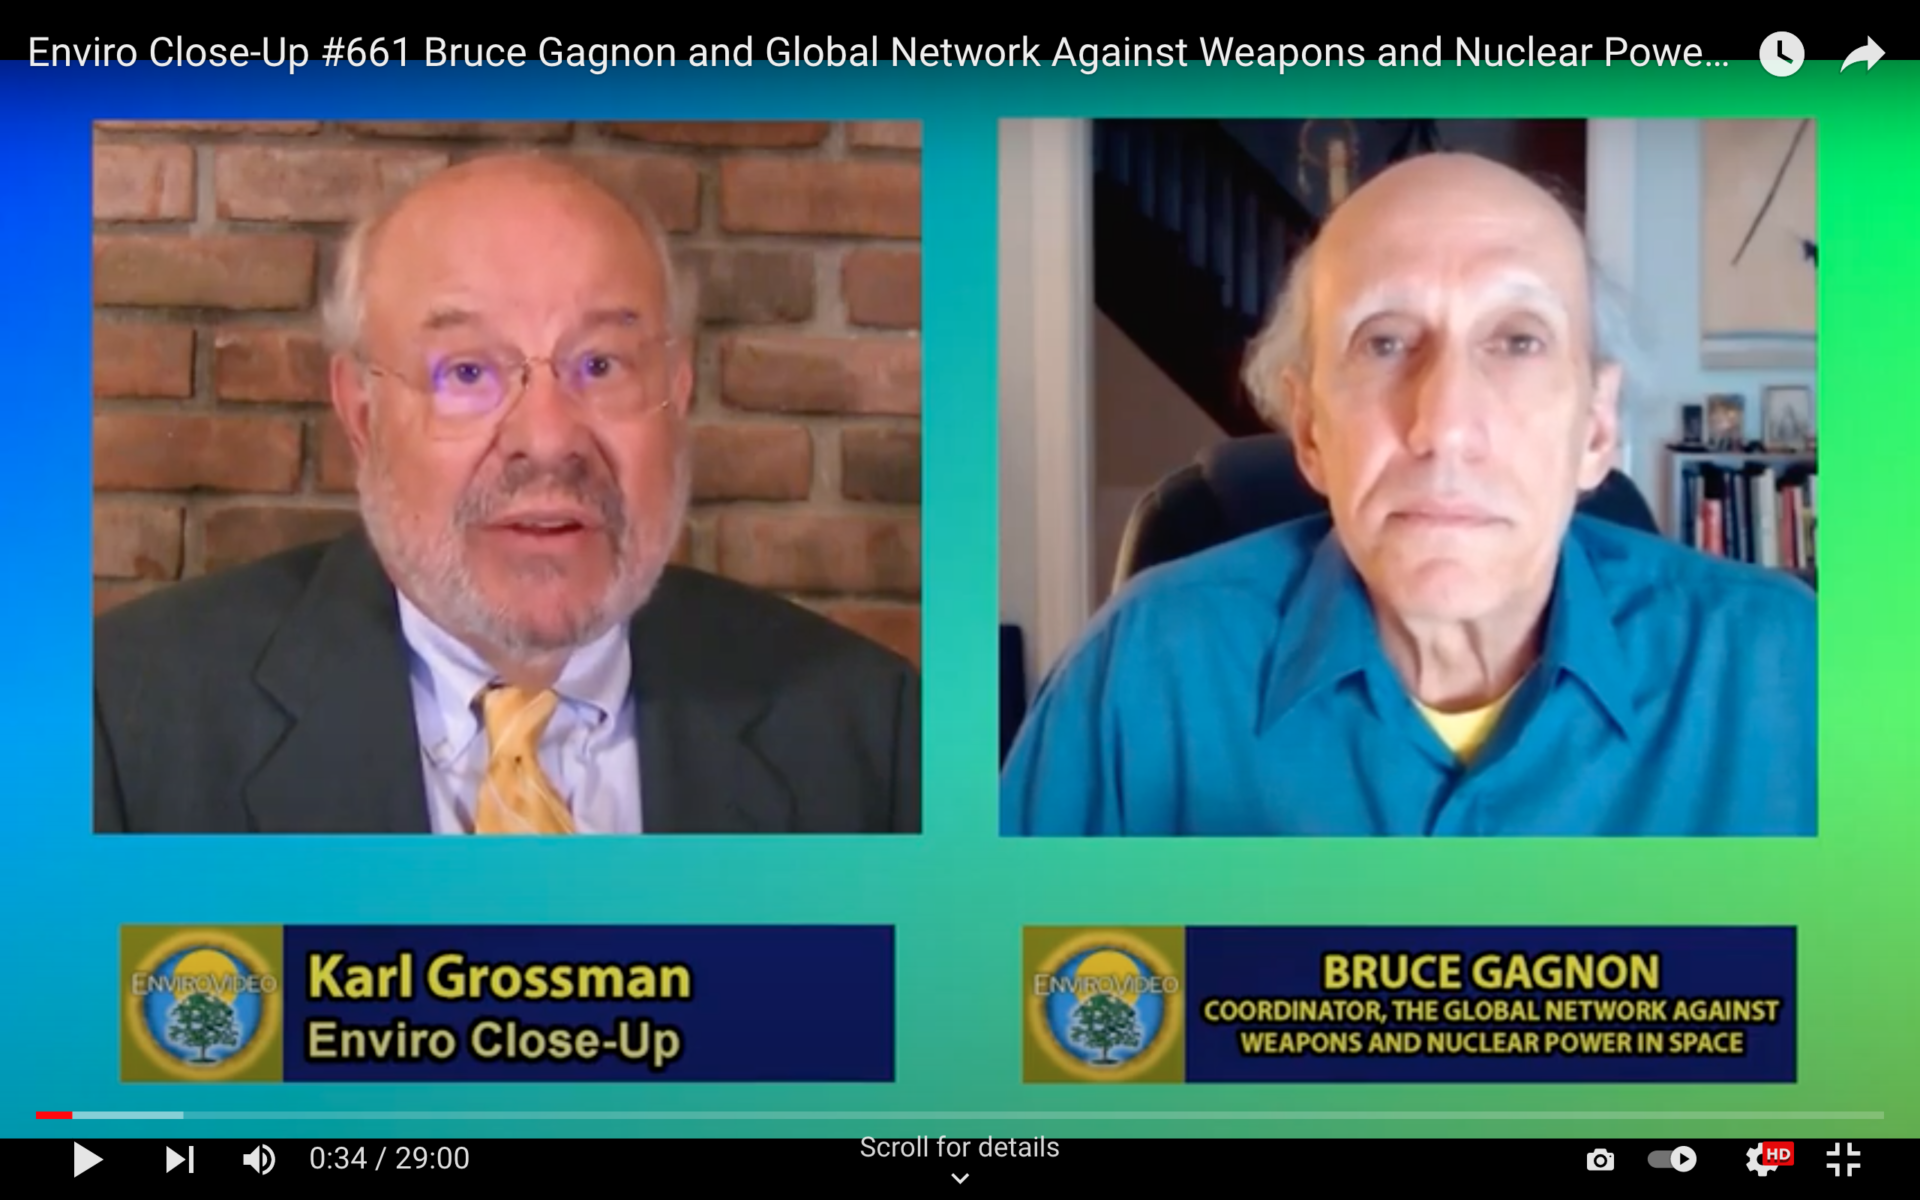 Just out — Enviro Close-Up #661 Bruce Gagnon and Global Network Against Weapons and Nuclear Power in Space